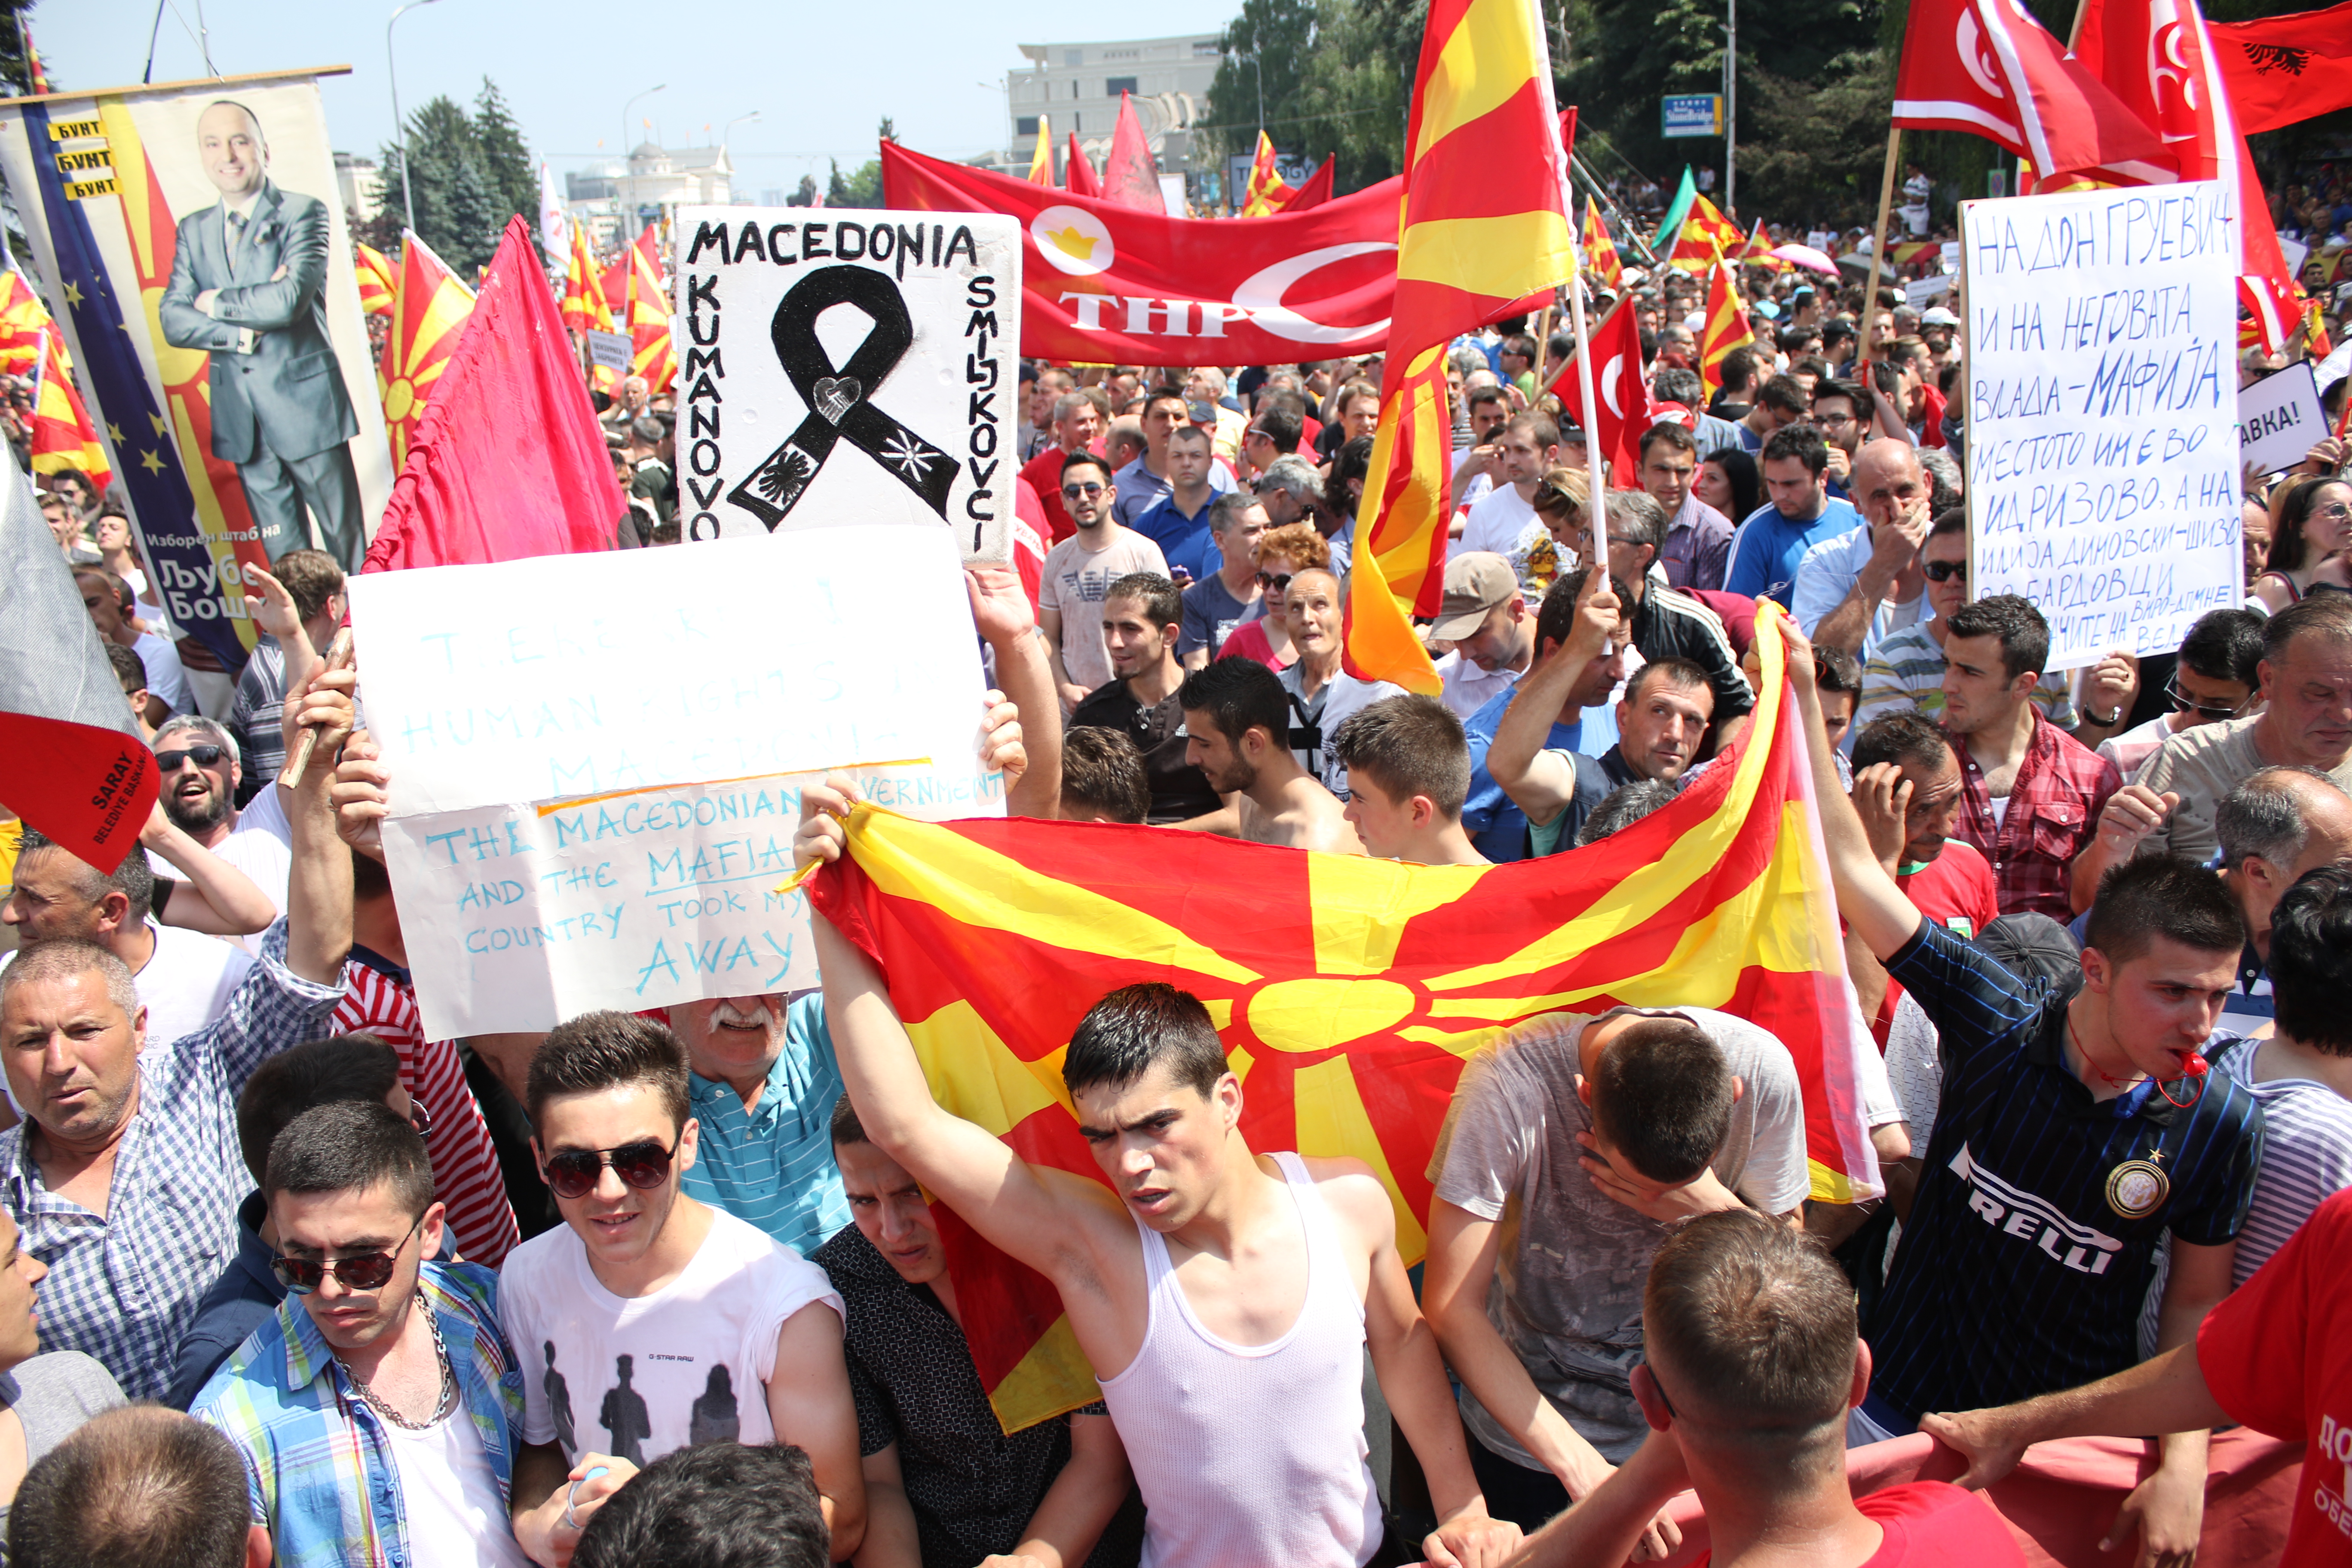 Skopje, Macedonia. 17th May 2015 -- Tens of thousands of protesters take to the streets of Macedonia's capital on Sunday, waving Macedonian and Albanian flags and calling for the government to resign. Photo by Aitor Sáez. Copyright Demotix